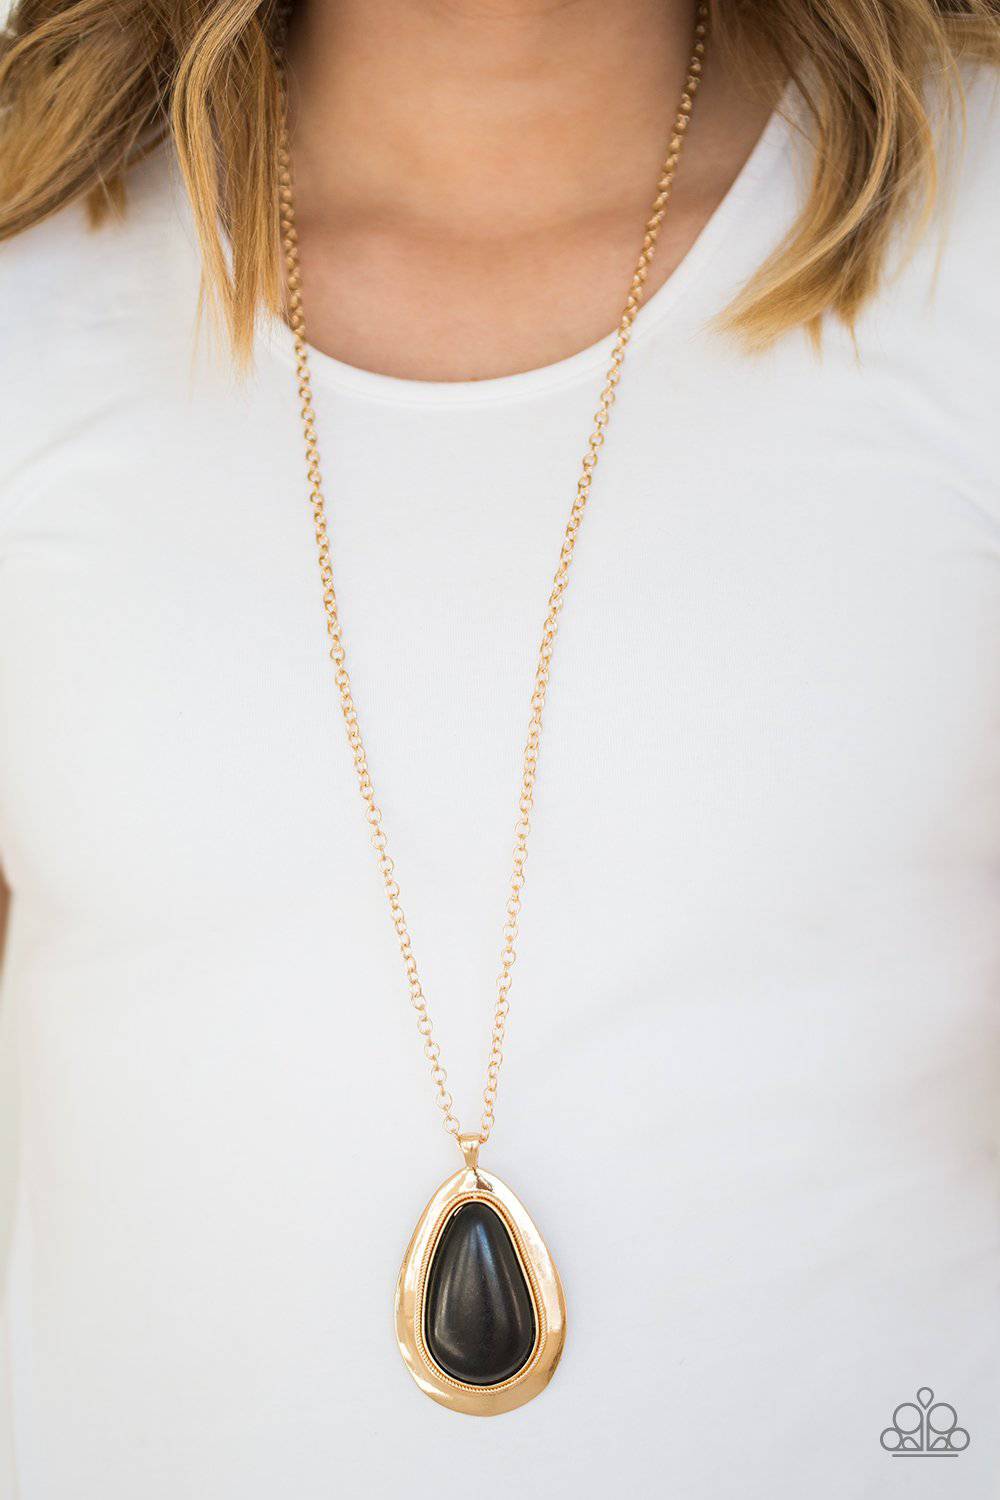 BADLAND To The Bone - Gold and Black Stone Teardrop Necklace - Paparazzi Accessories - GlaMarous Titi Jewels